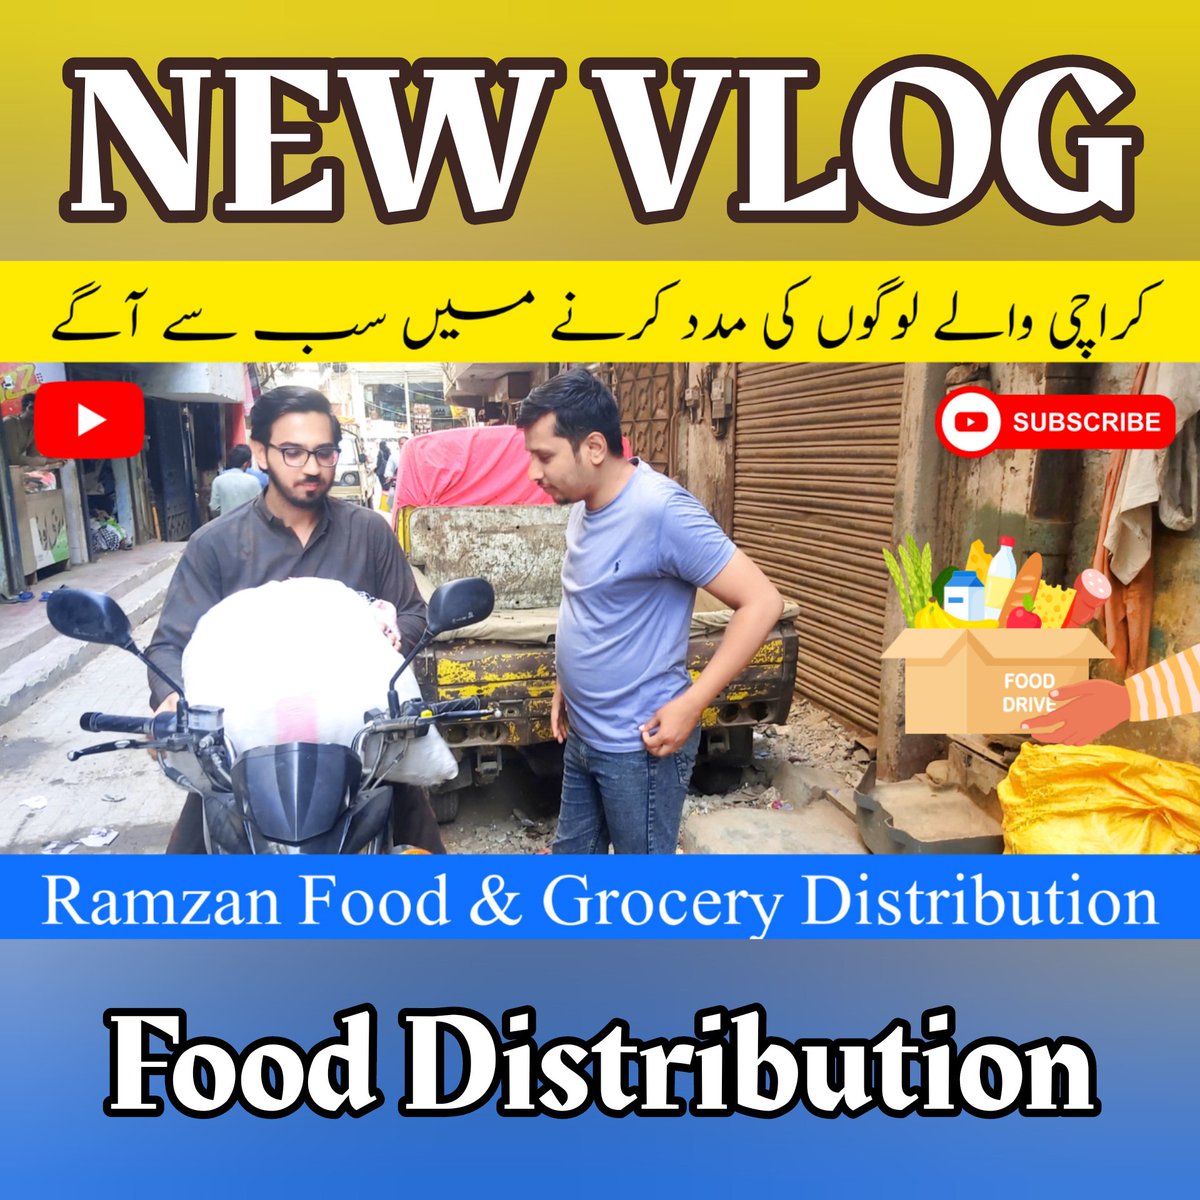 youtu.be/MzvJ9M3sEwM
 
In last week of #Ramdhan, we organized a #GoogleLocalGuides #FoodDistribution #Meetup in #Karachi. Today I just posted a recap post on #YouTube
Please check the Video & share your feedback through comments to improve for the future.

#LetsGuide #Iftar